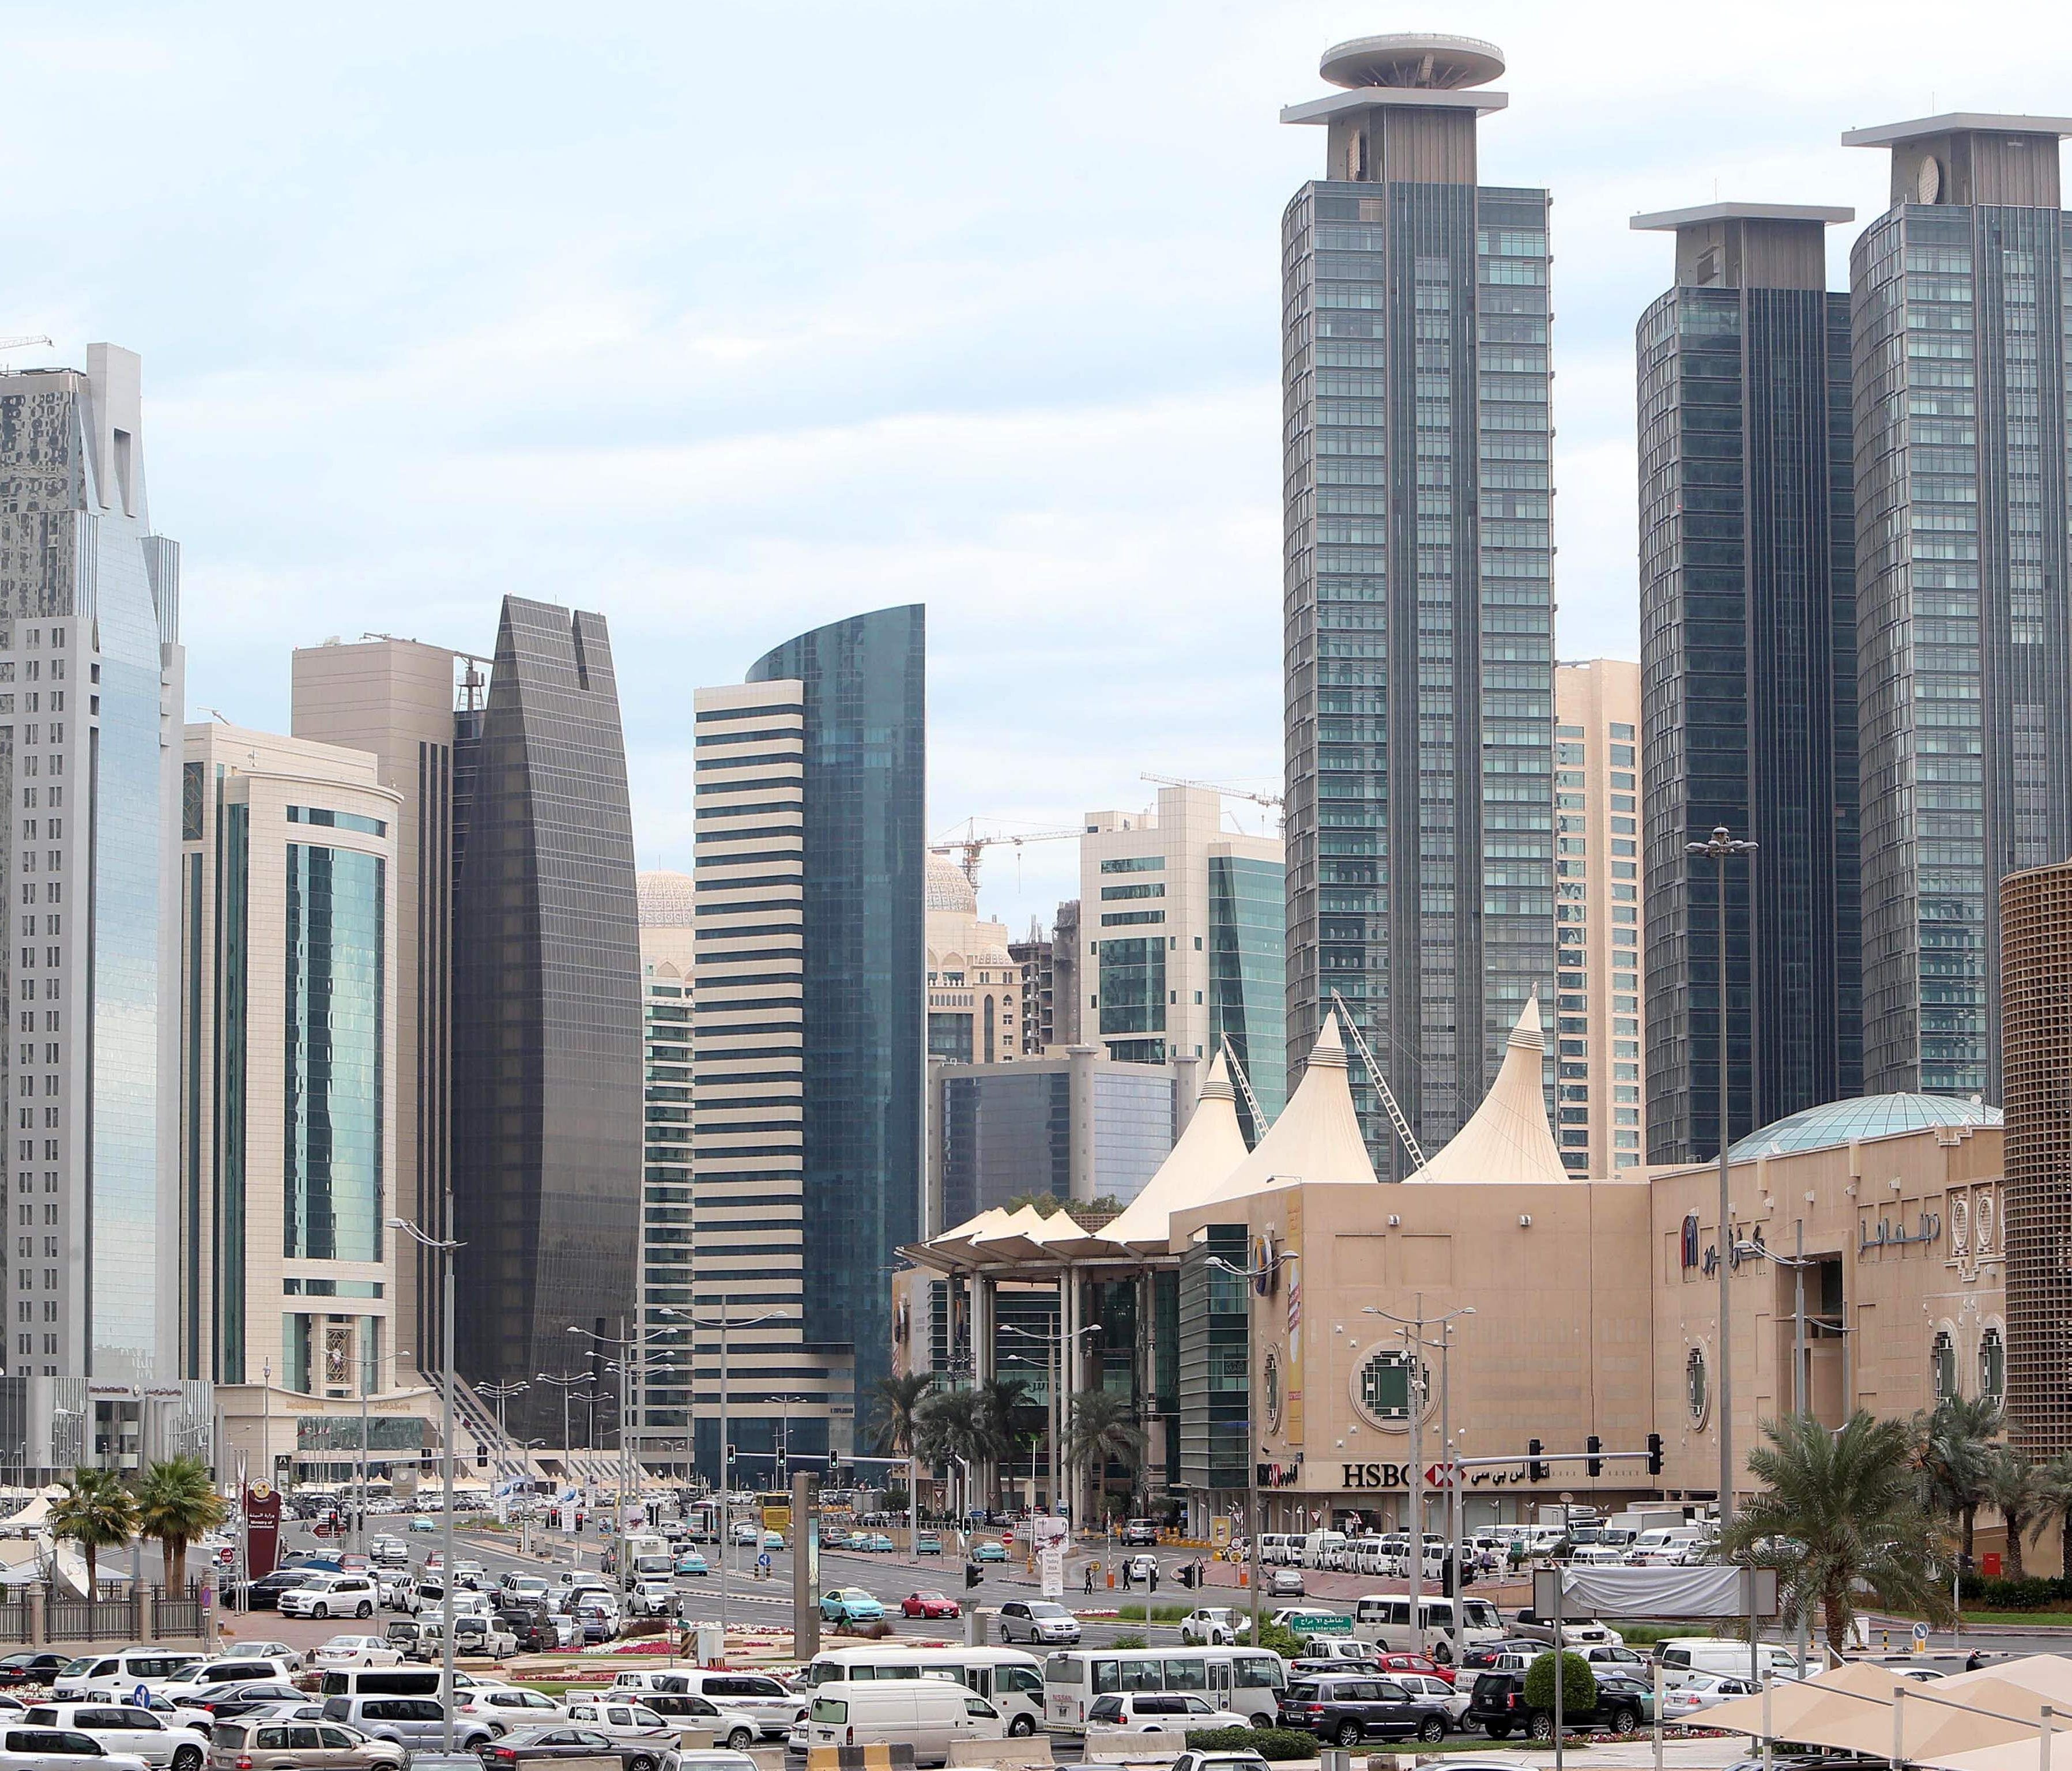 This file photo taken on November 24, 2015 shows skyscrapers in the Qatari capital Doha.